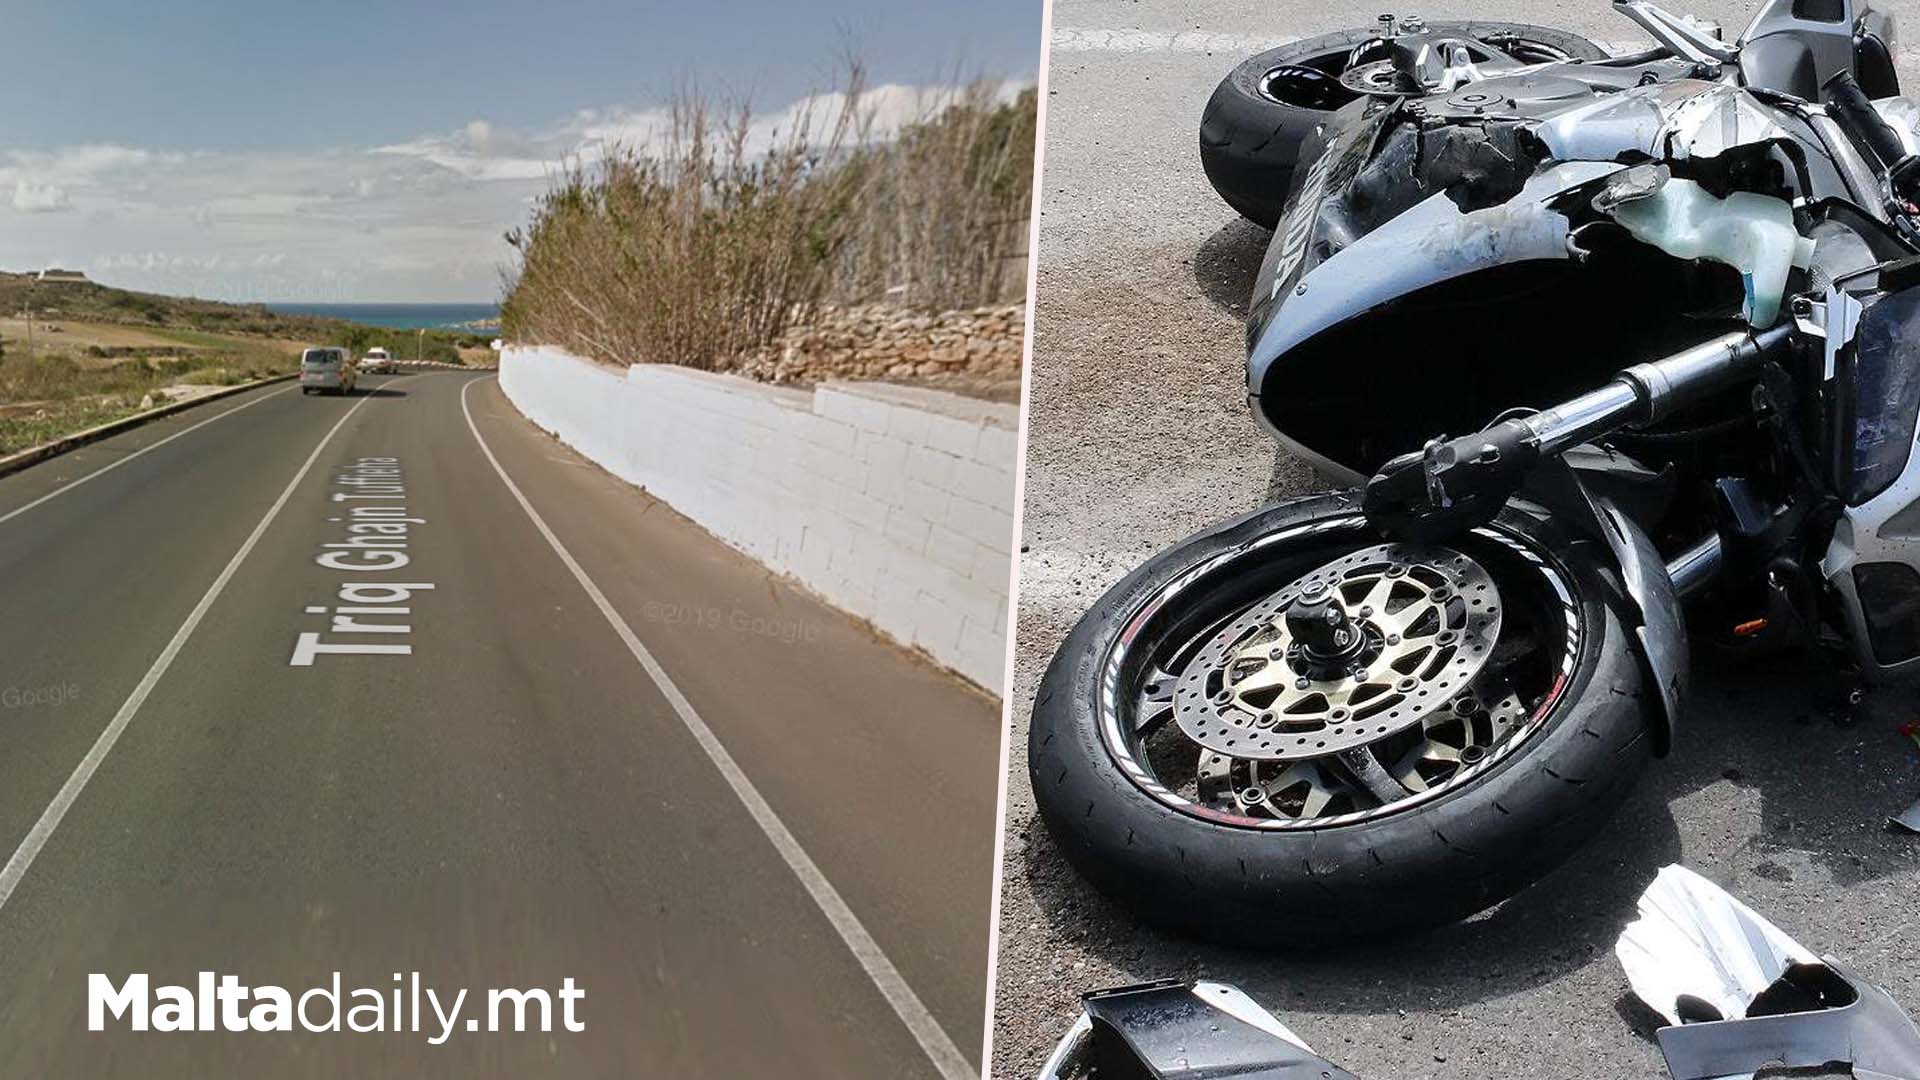 65 Year Old Motorcyclist Crashes Into Concrete Barriers